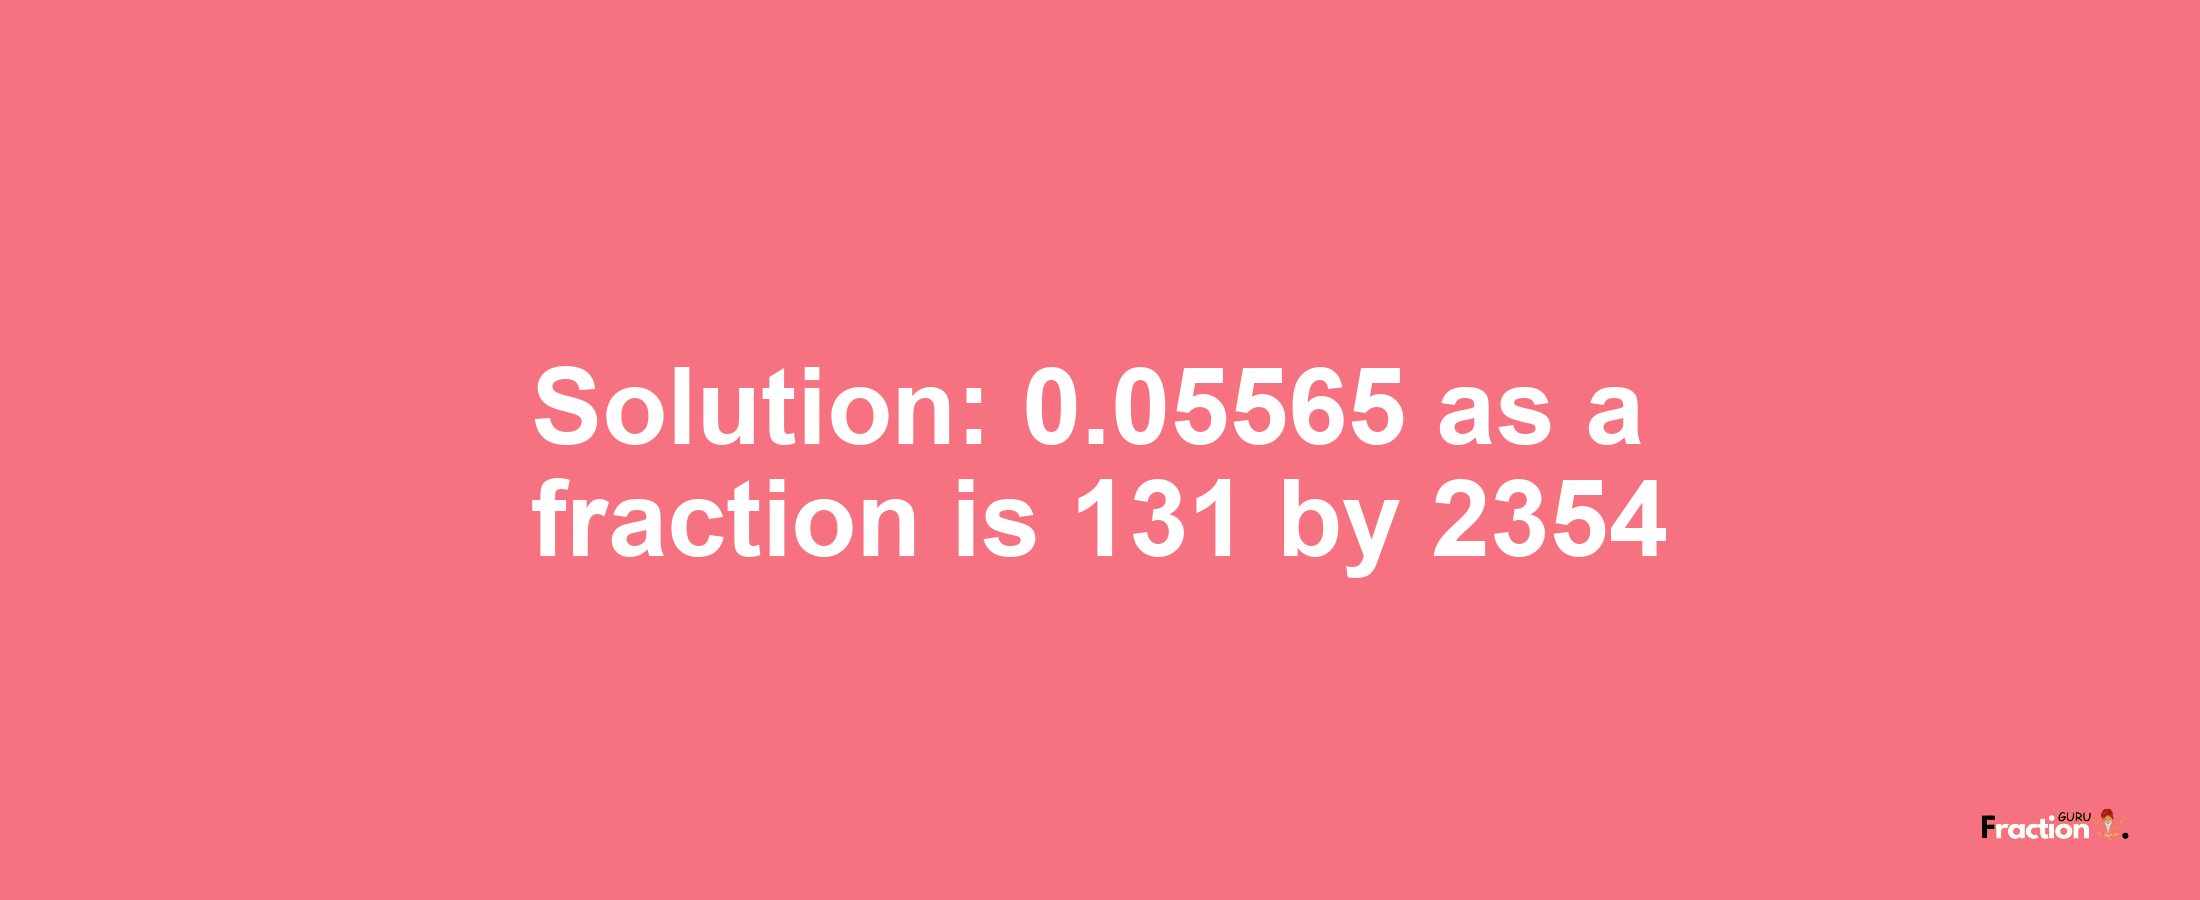 Solution:0.05565 as a fraction is 131/2354